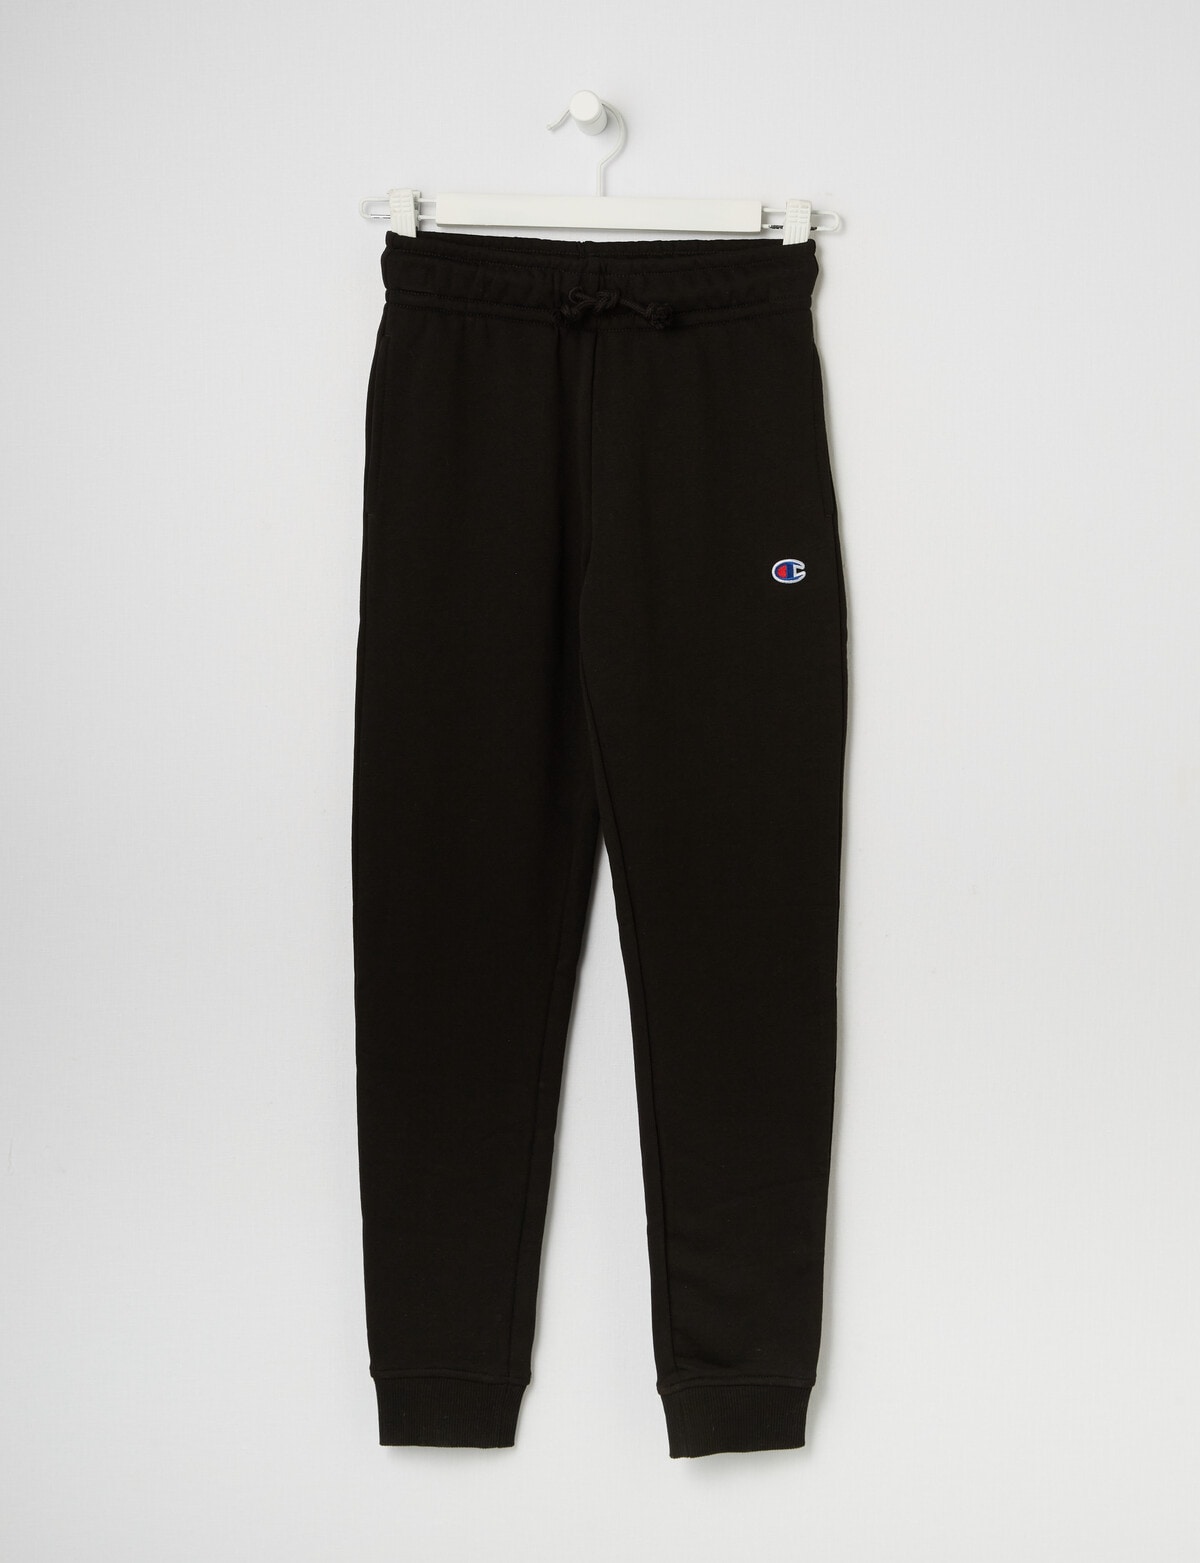 Champion French Terry Pant, Black - Pants & Jeans